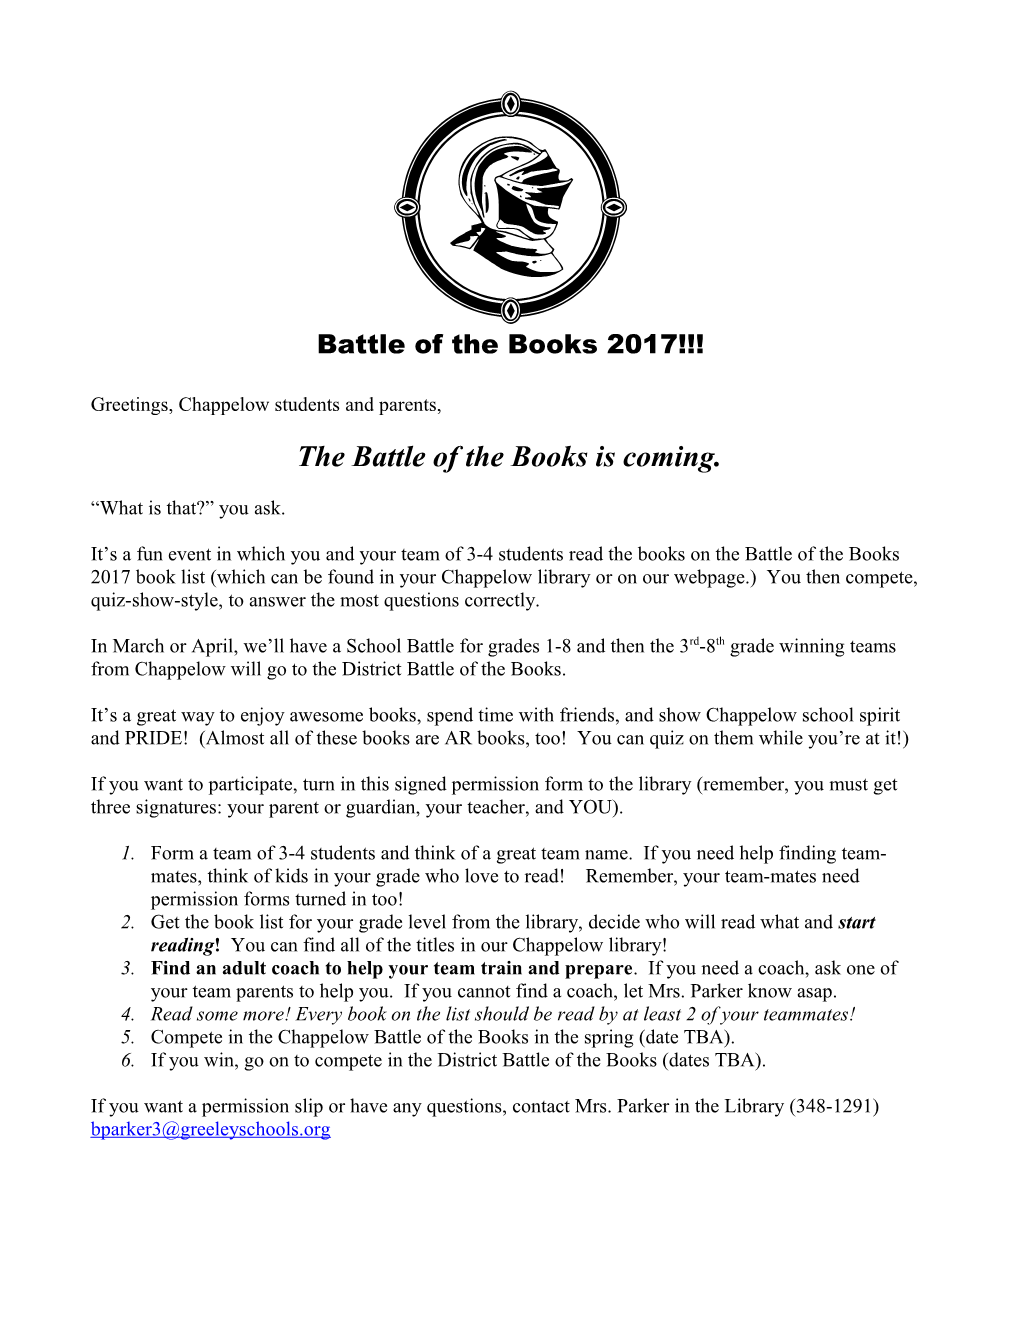 Battle of the Books 2011